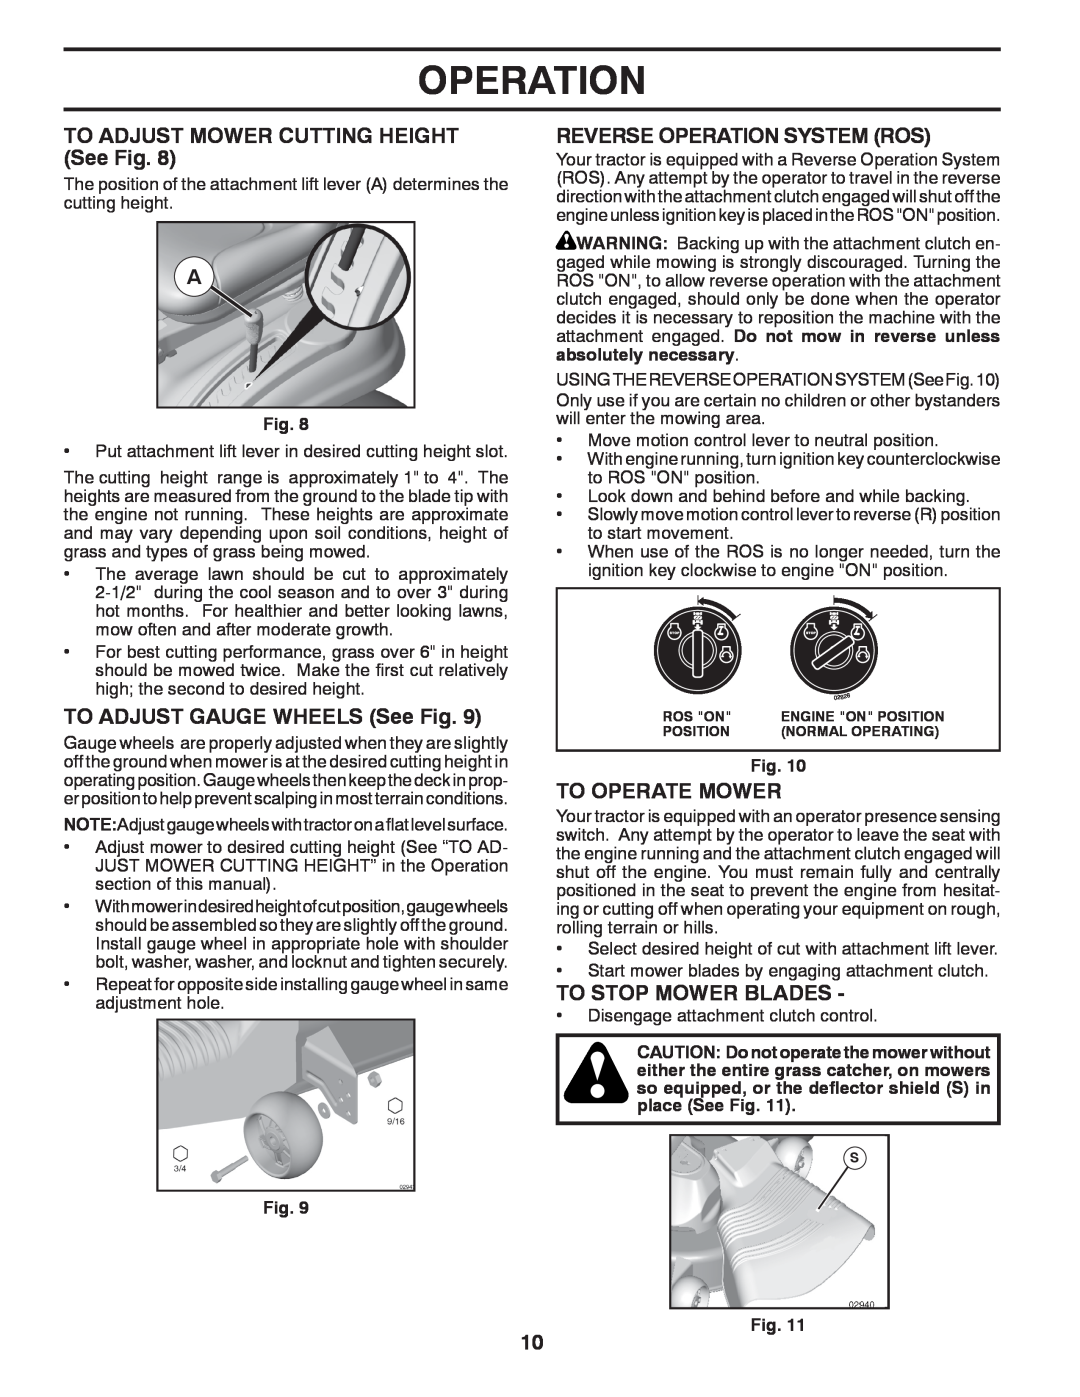 Poulan 438706 manual TO ADJUST MOWER CUTTING HEIGHT See Fig, TO ADJUST GAUGE WHEELS See Fig, Reverse Operation System Ros 